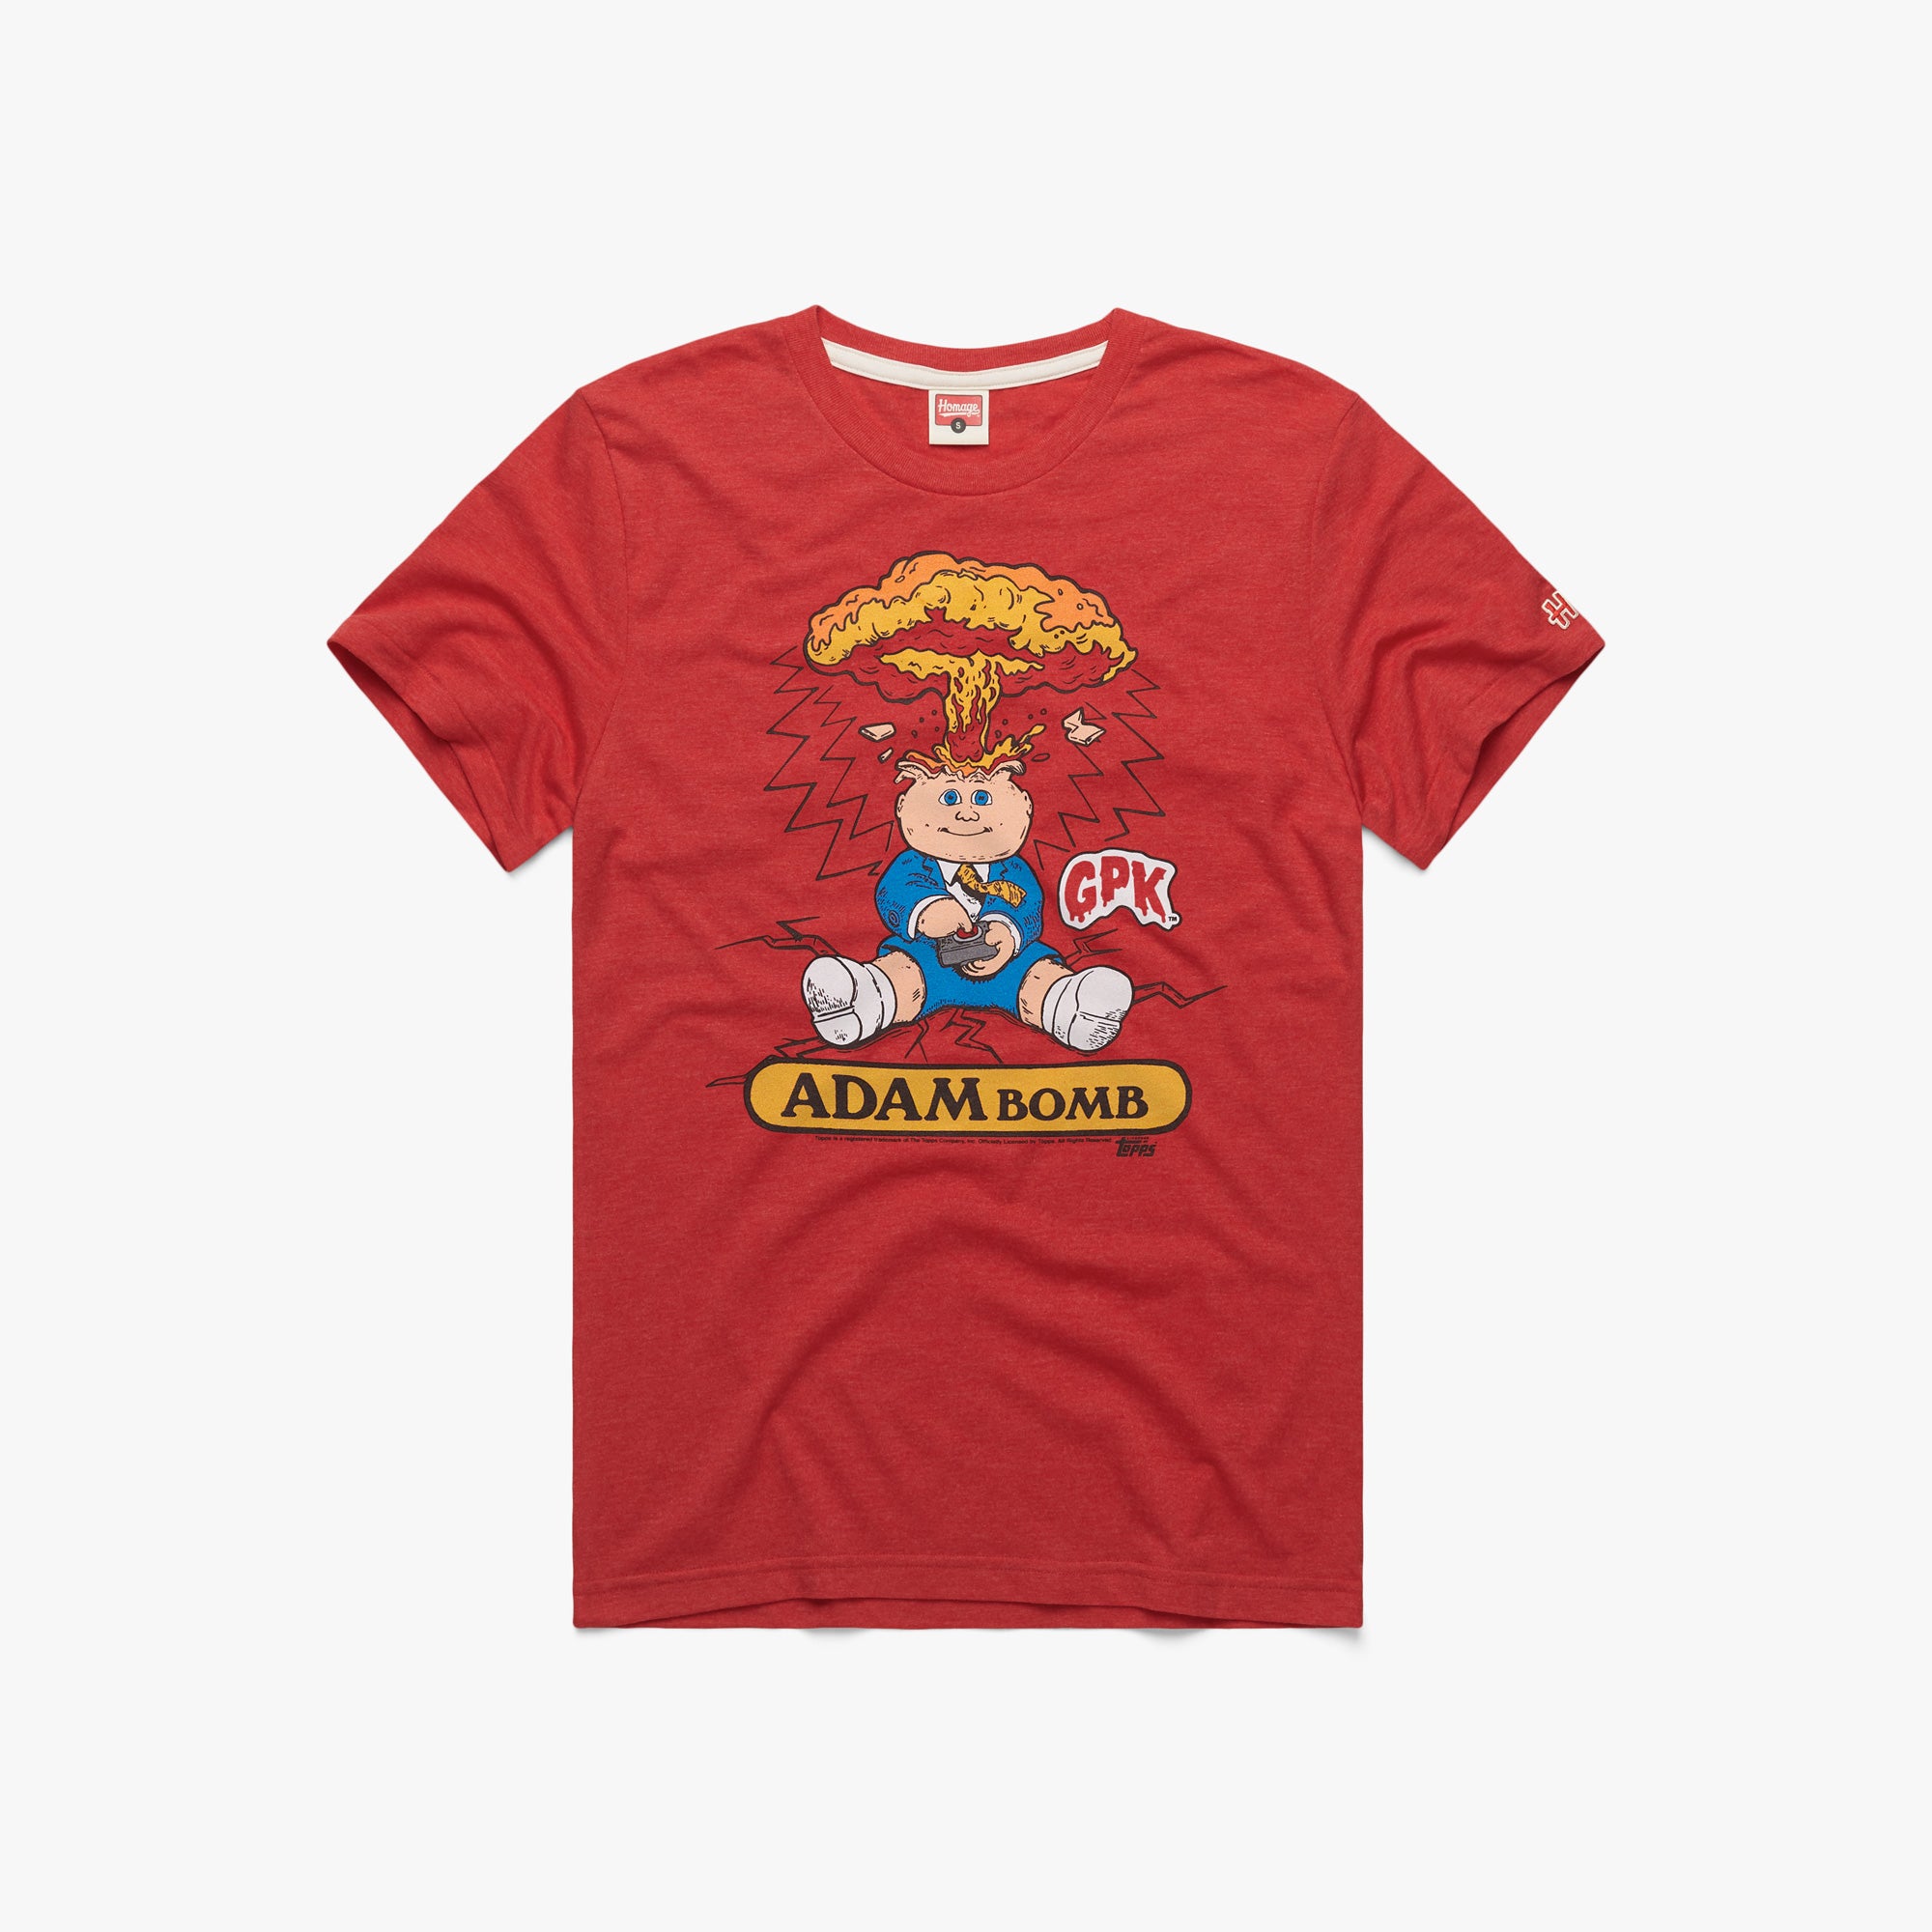 Garbage Pail Kids Adam Bomb T-Shirt from Homage. | Red | Vintage Apparel from Homage.